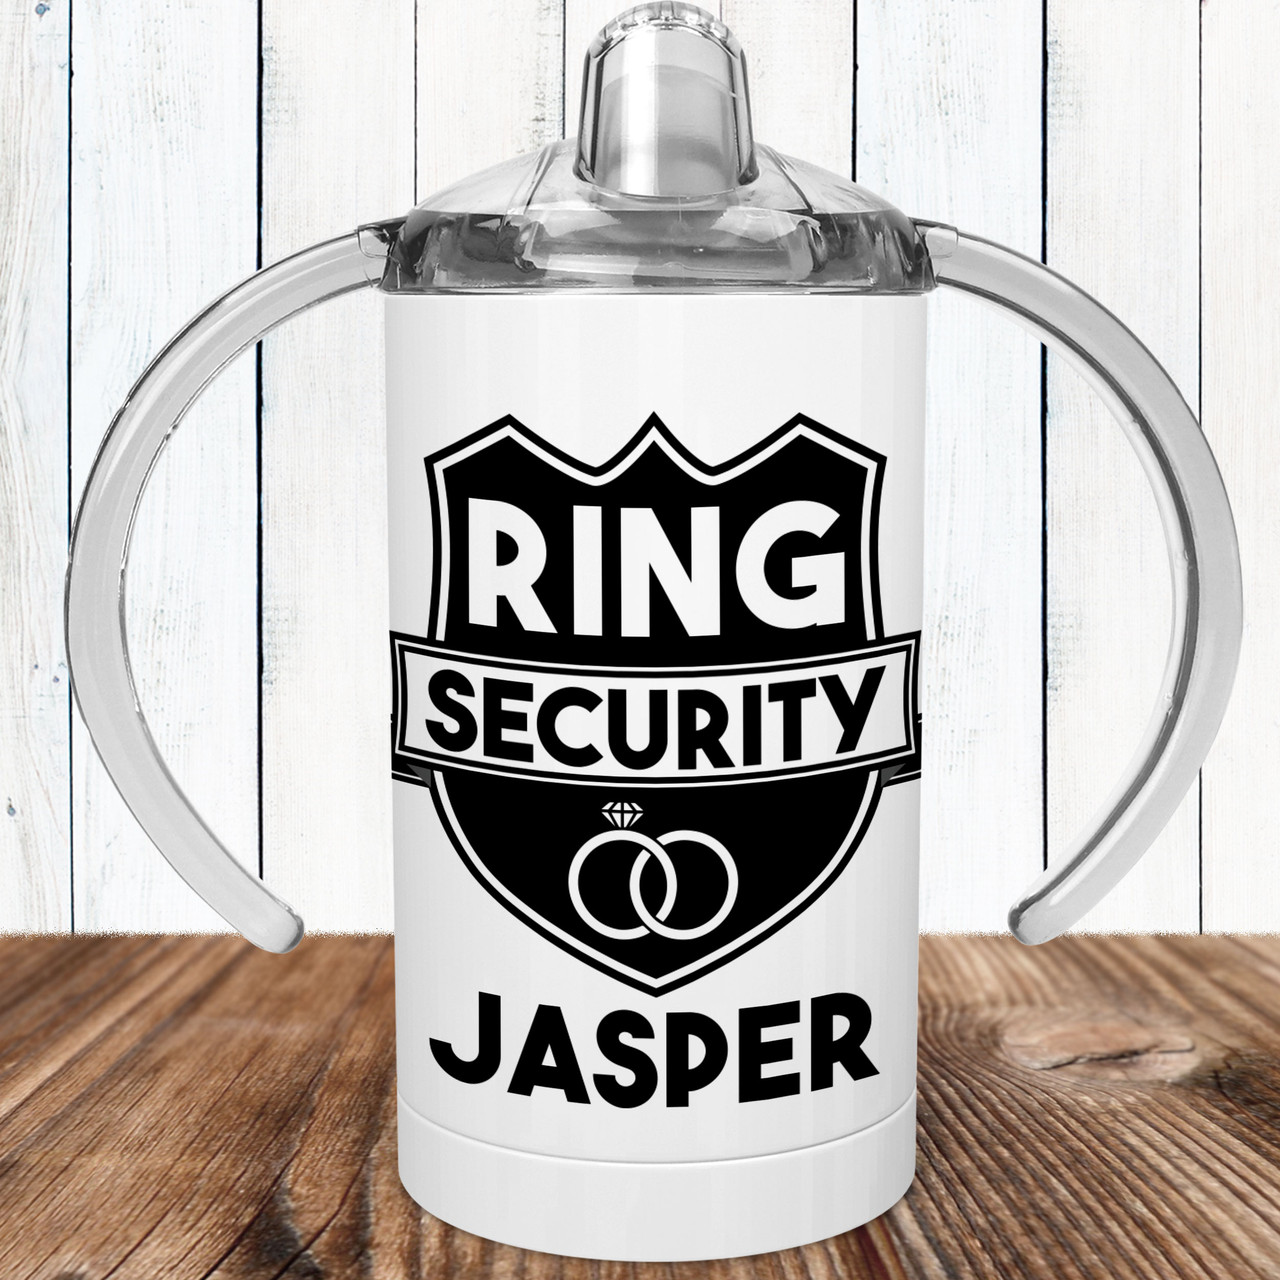 https://cdn11.bigcommerce.com/s-5grzuu6/images/stencil/1280x1280/products/5783/42613/Ring-Security-Ring_Bearer_Custom_Sippy-Cup__71994.1630104101.jpg?c=2